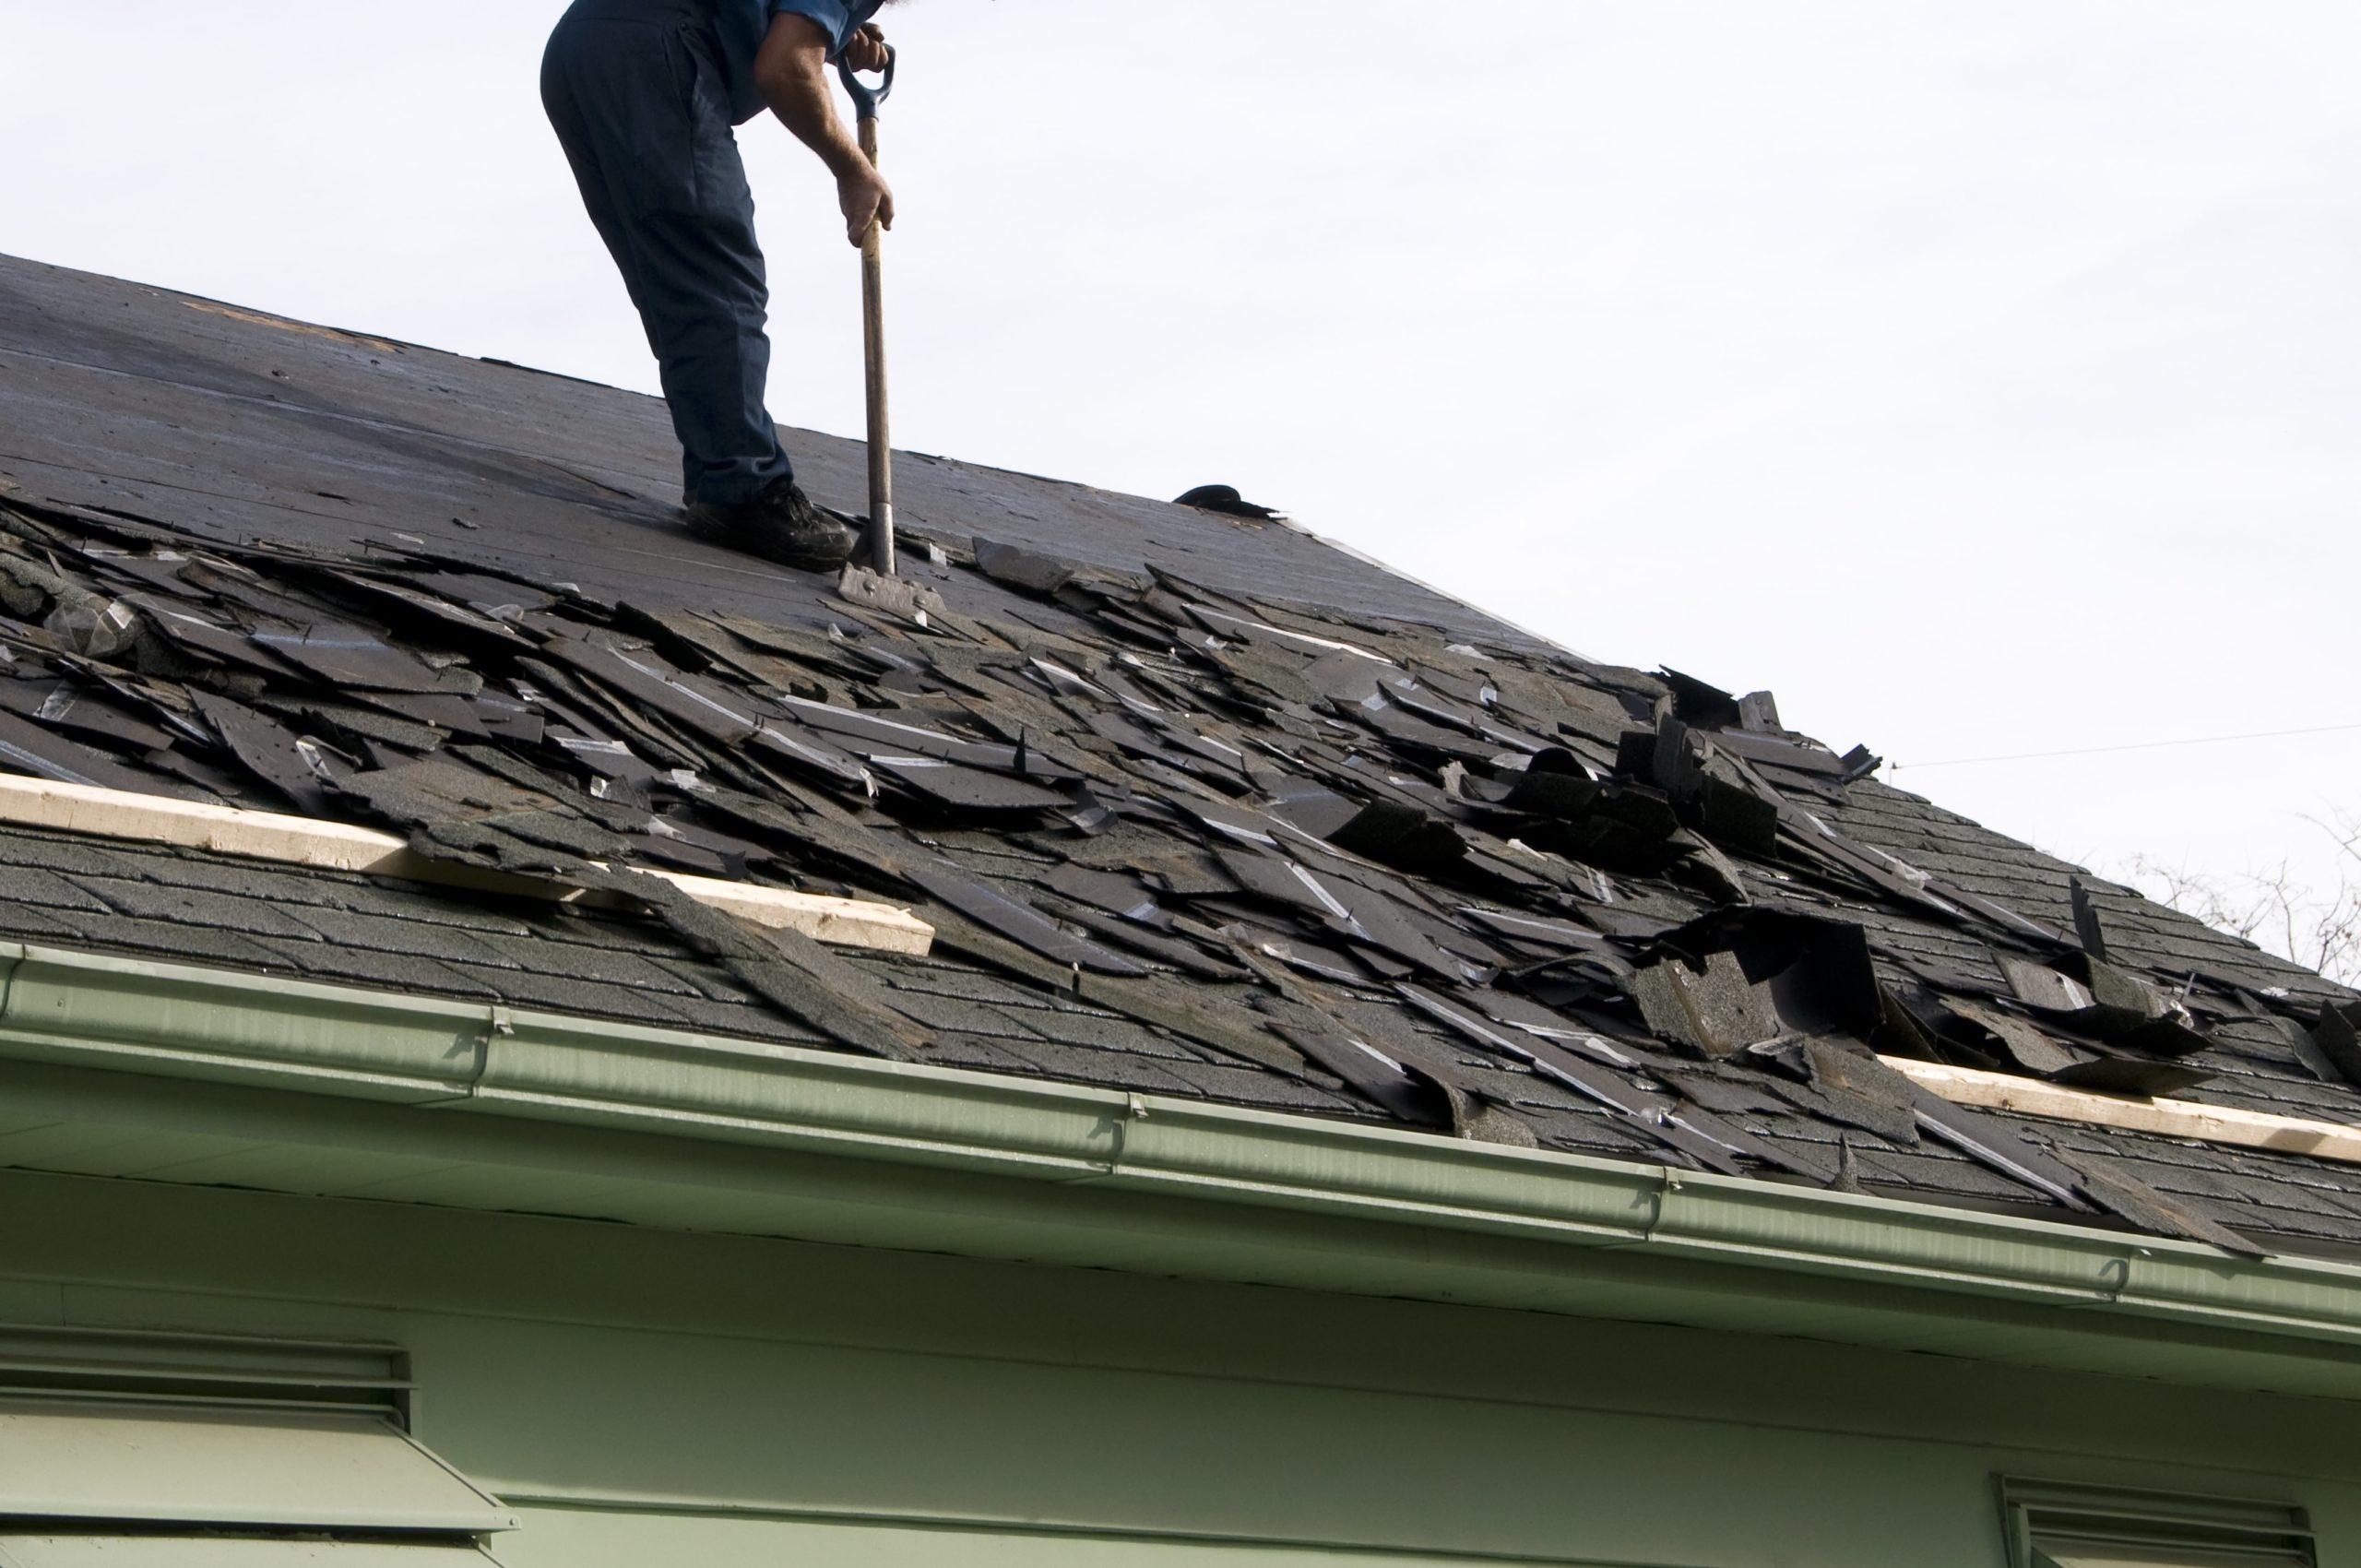 Shingle Disposal Dilemma: How Much Does It Cost to Dispose of Roof Shingles?